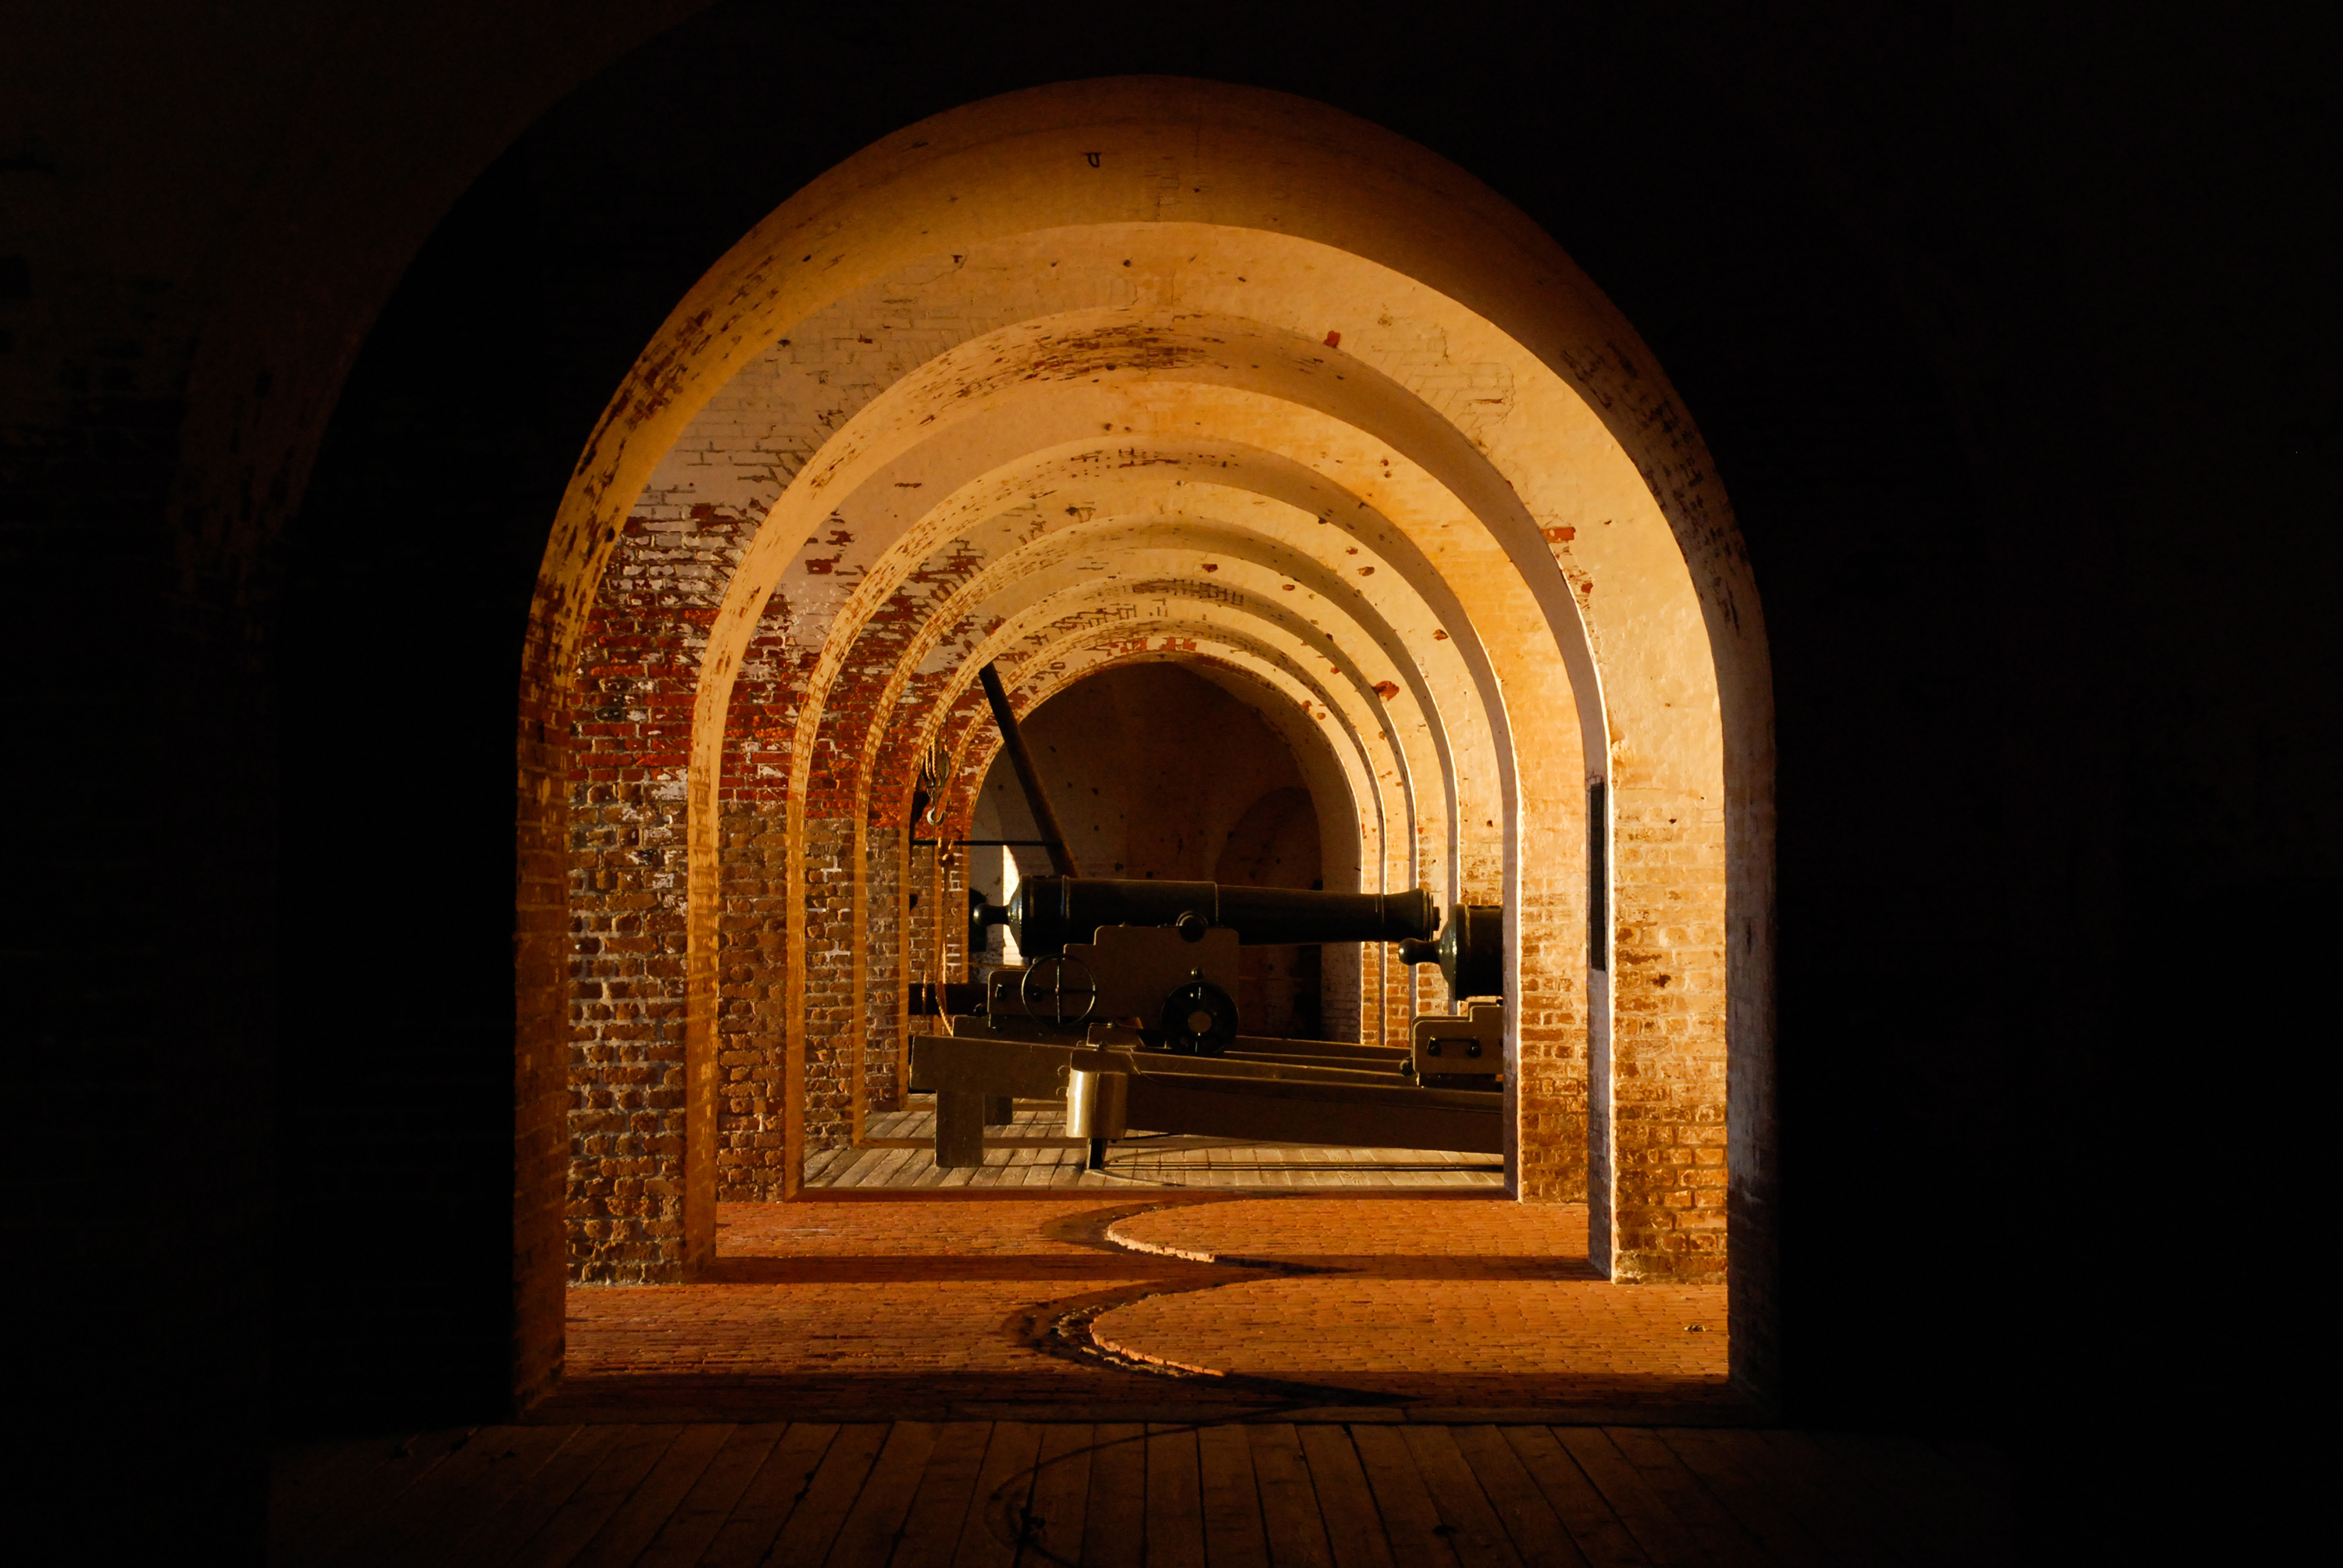 The brick of the fort glow in the late afternoon light. The arches inside the fort reveal a cannon i